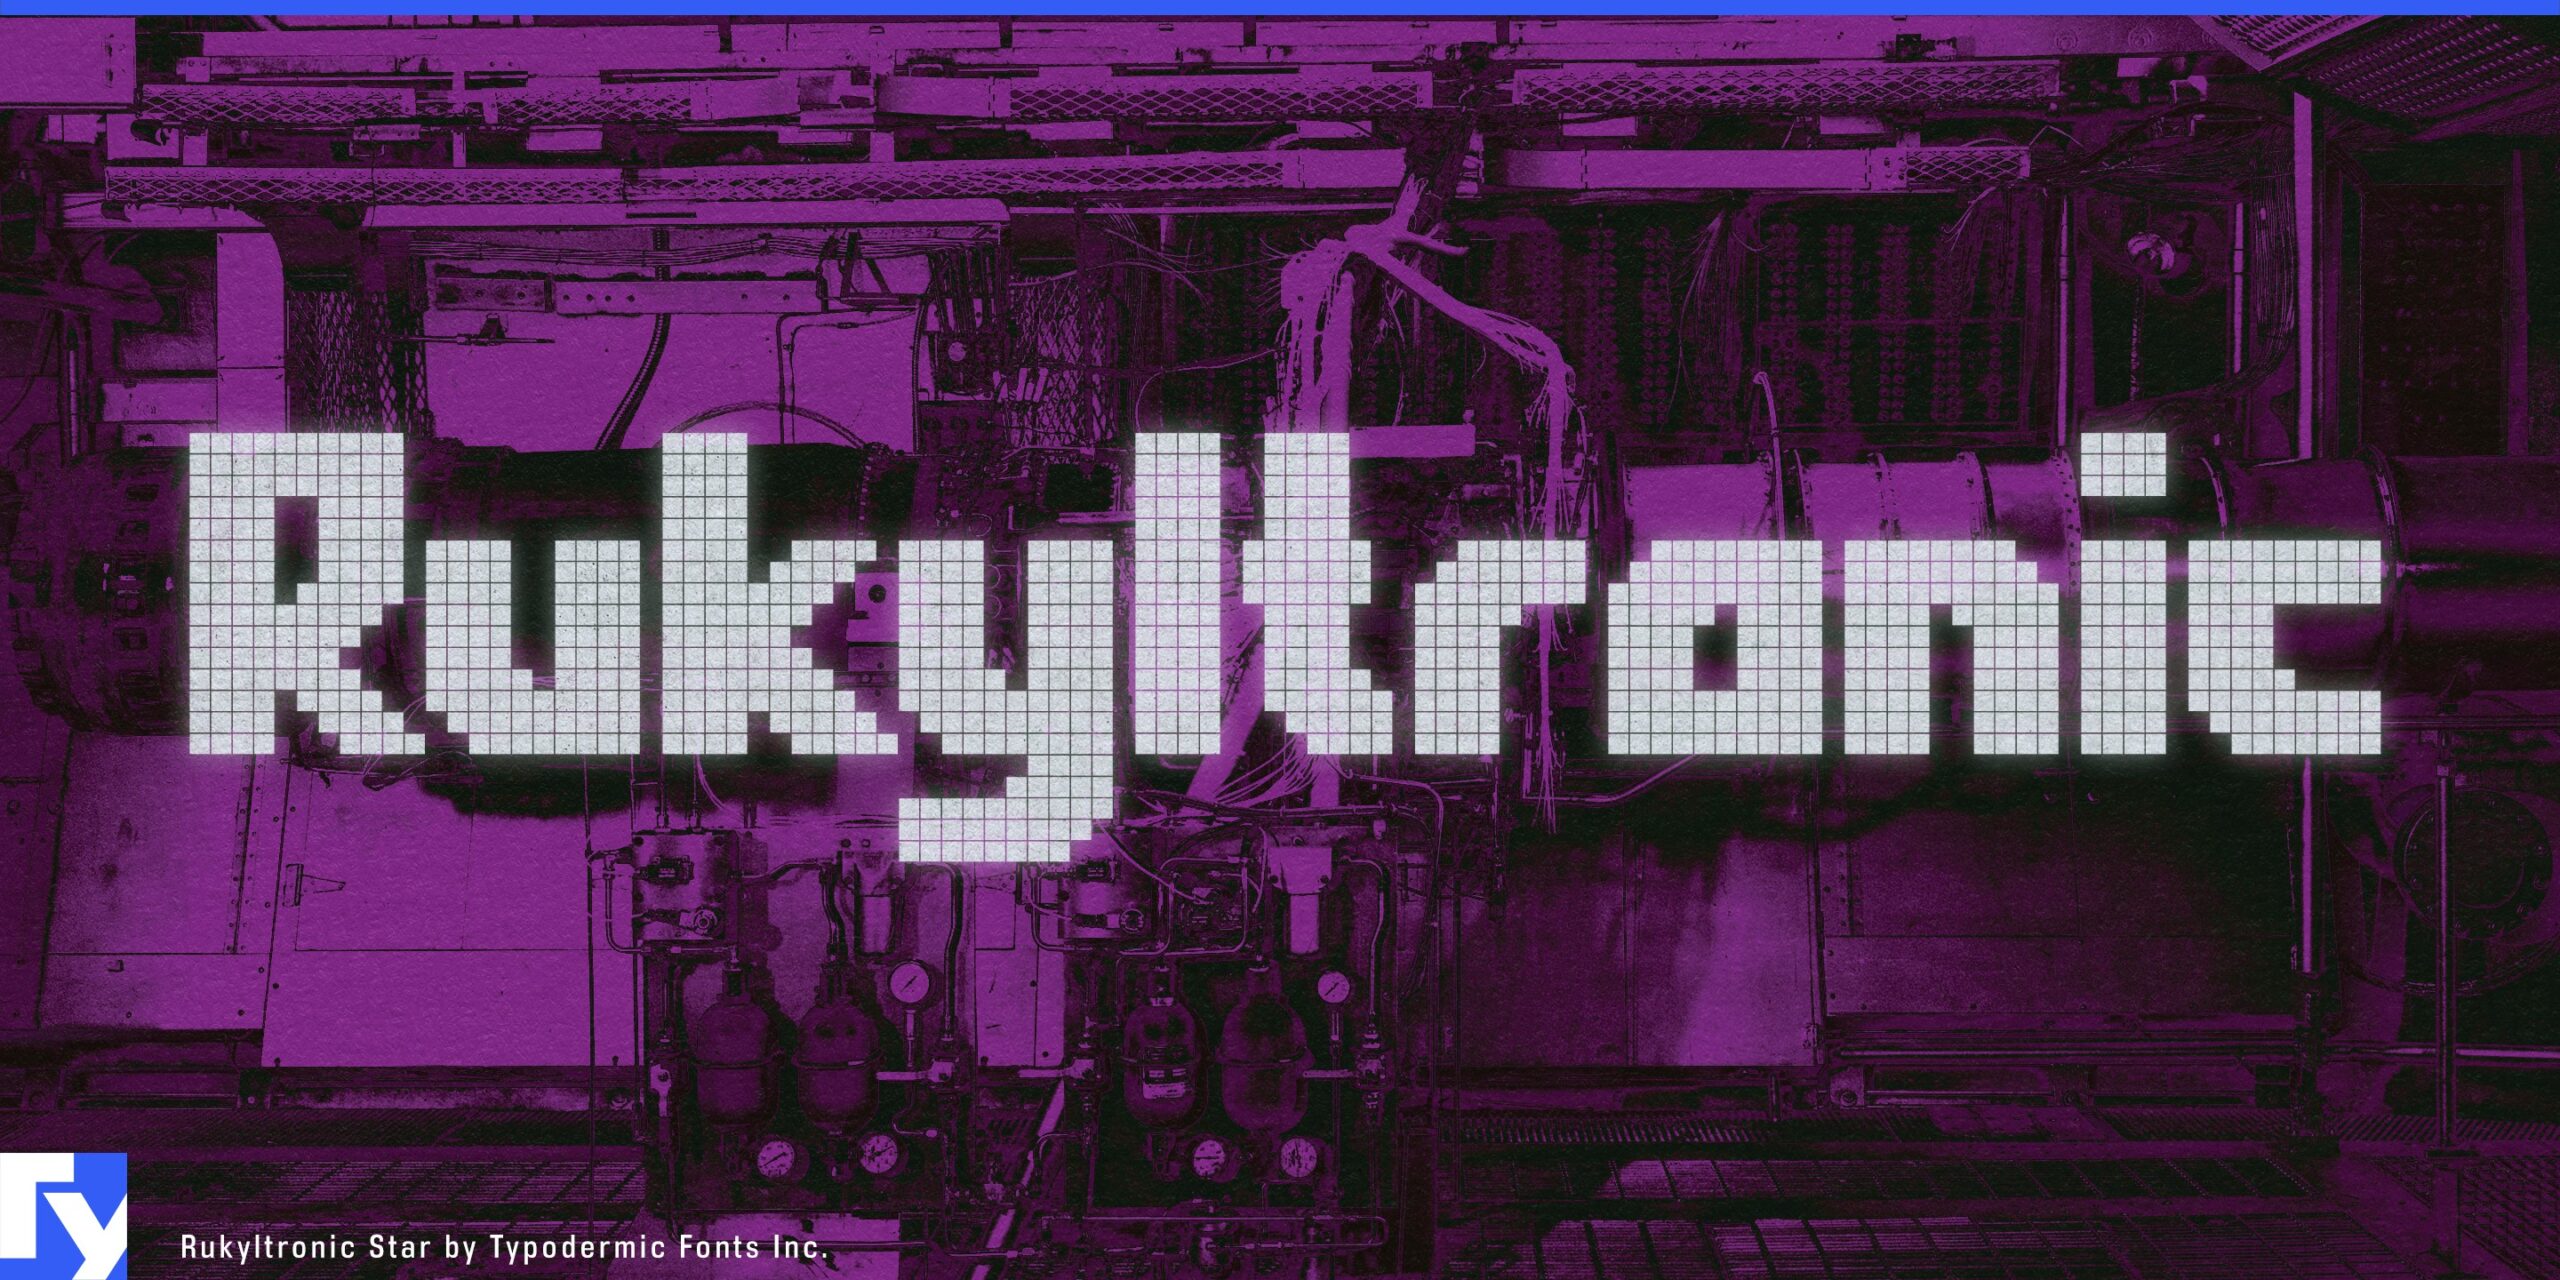 Step into the 80s with Rukyltronic's vintage computer feel